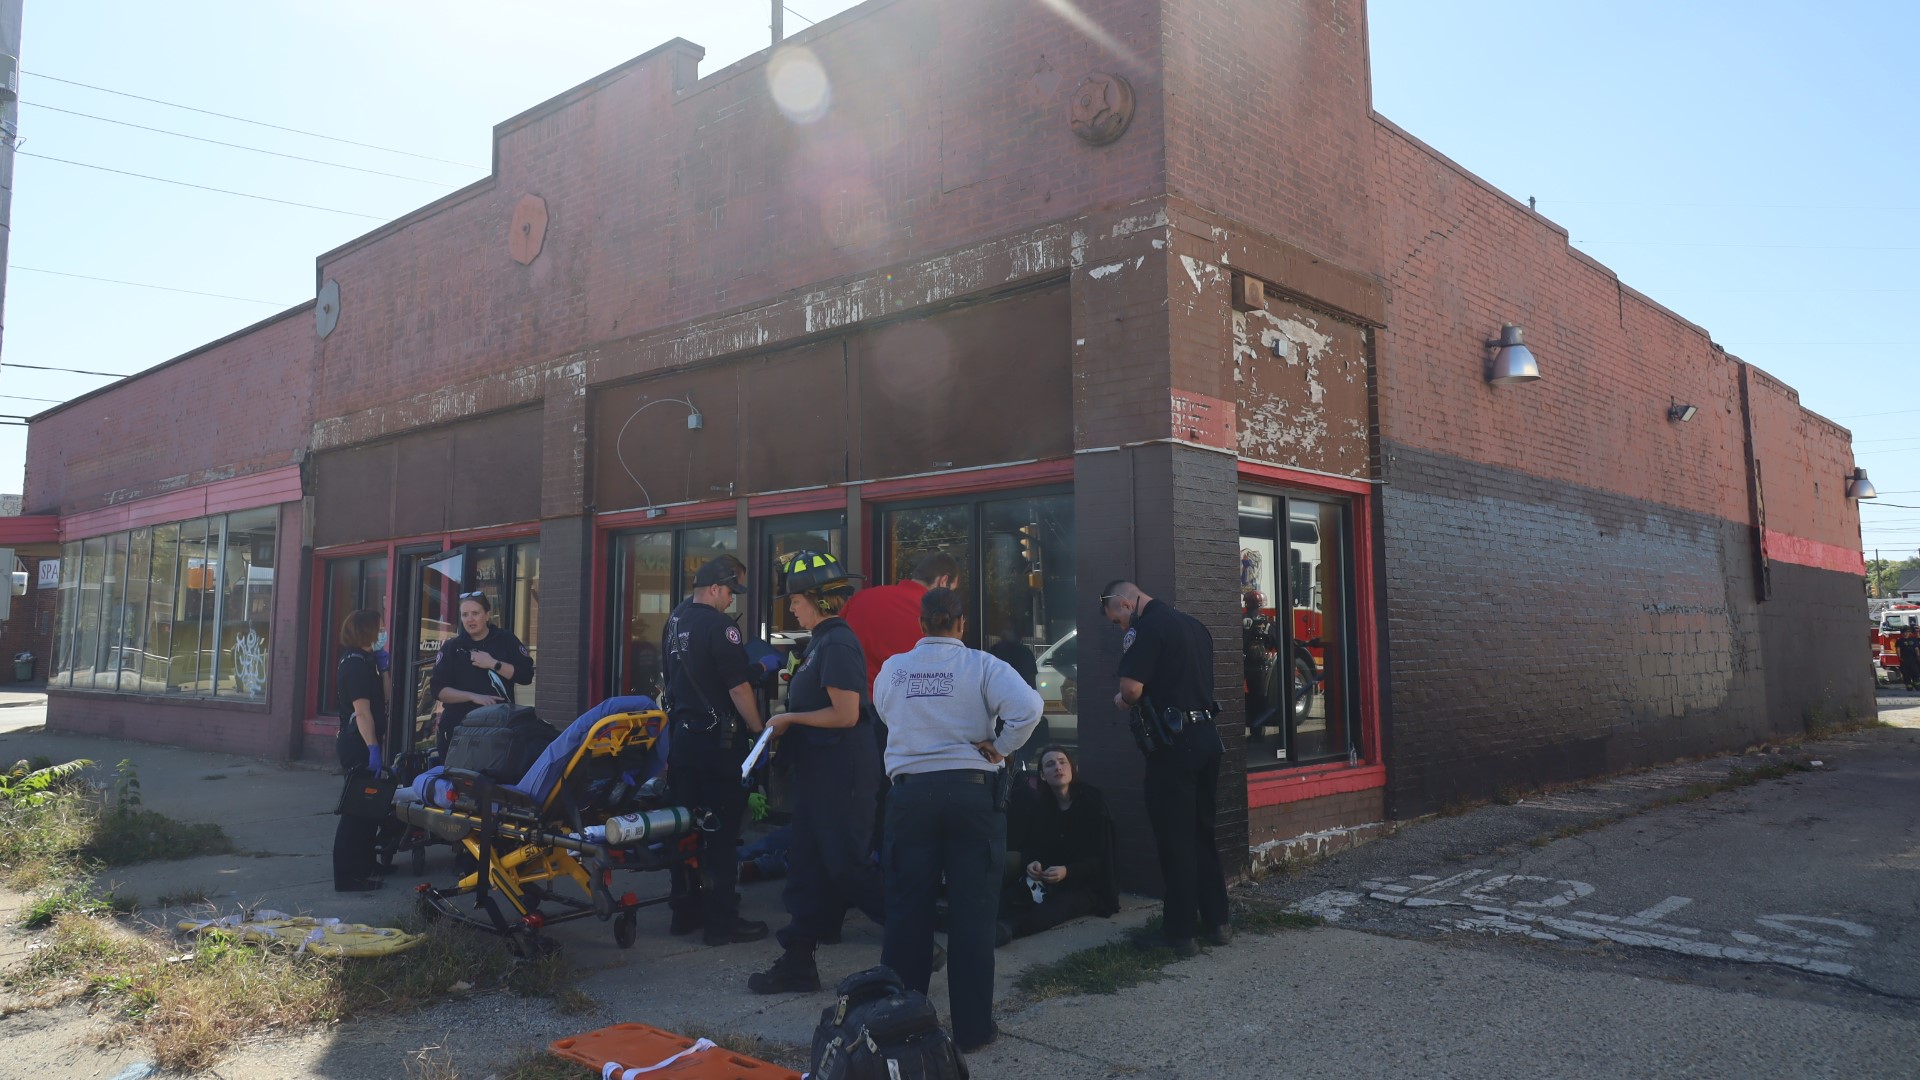 The teens, from Fishers and Indianapolis, were exploring old buildings. Little did they know, one of the buildings had "significant" structural issues, IFD said.